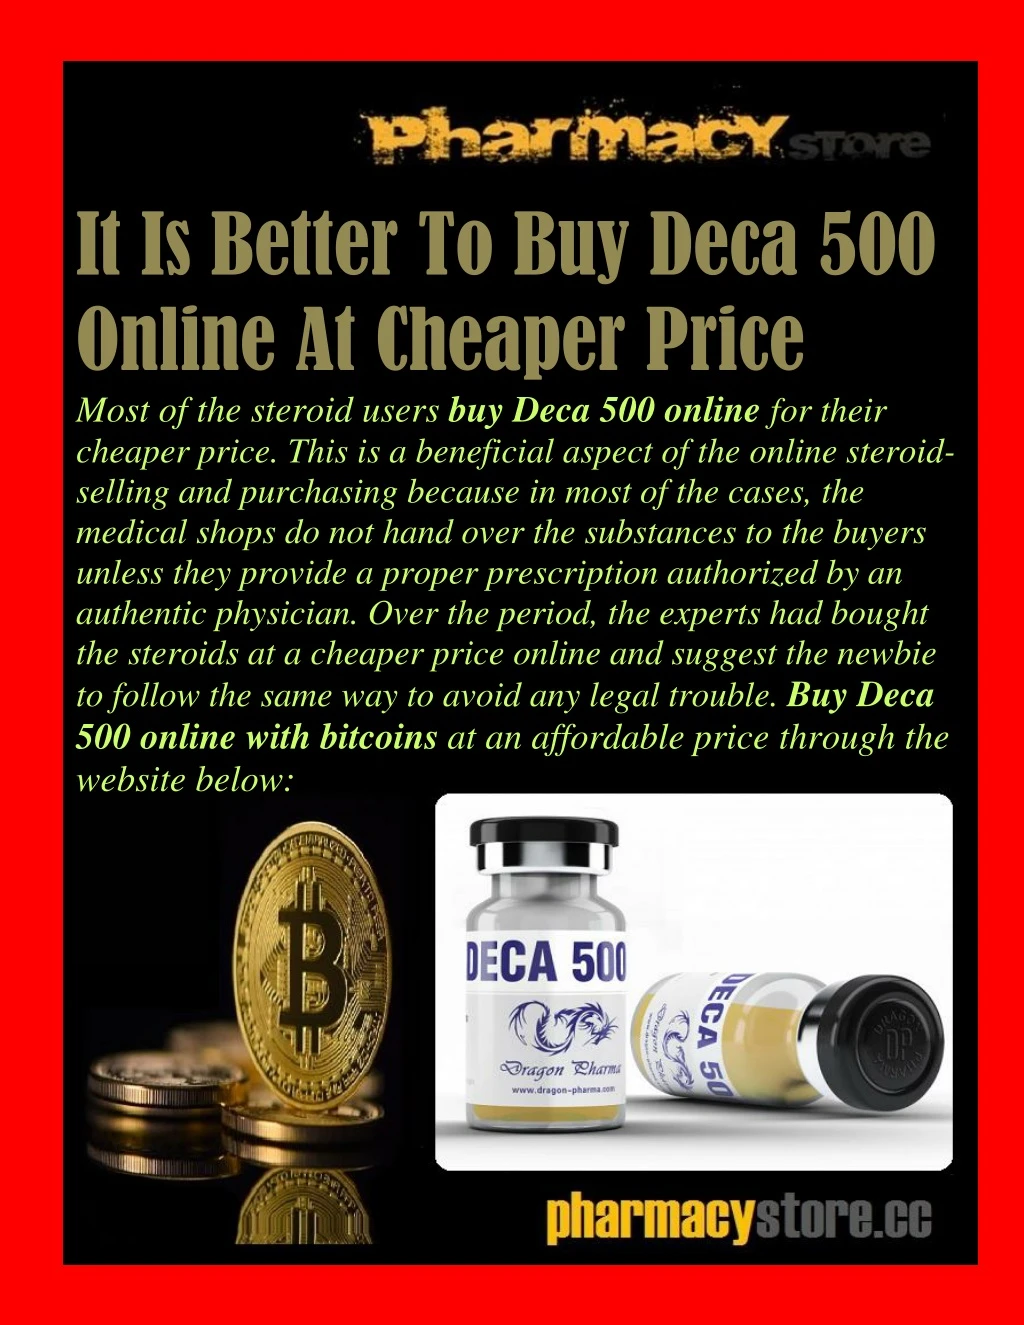 it is better to buy deca 500 online at cheaper